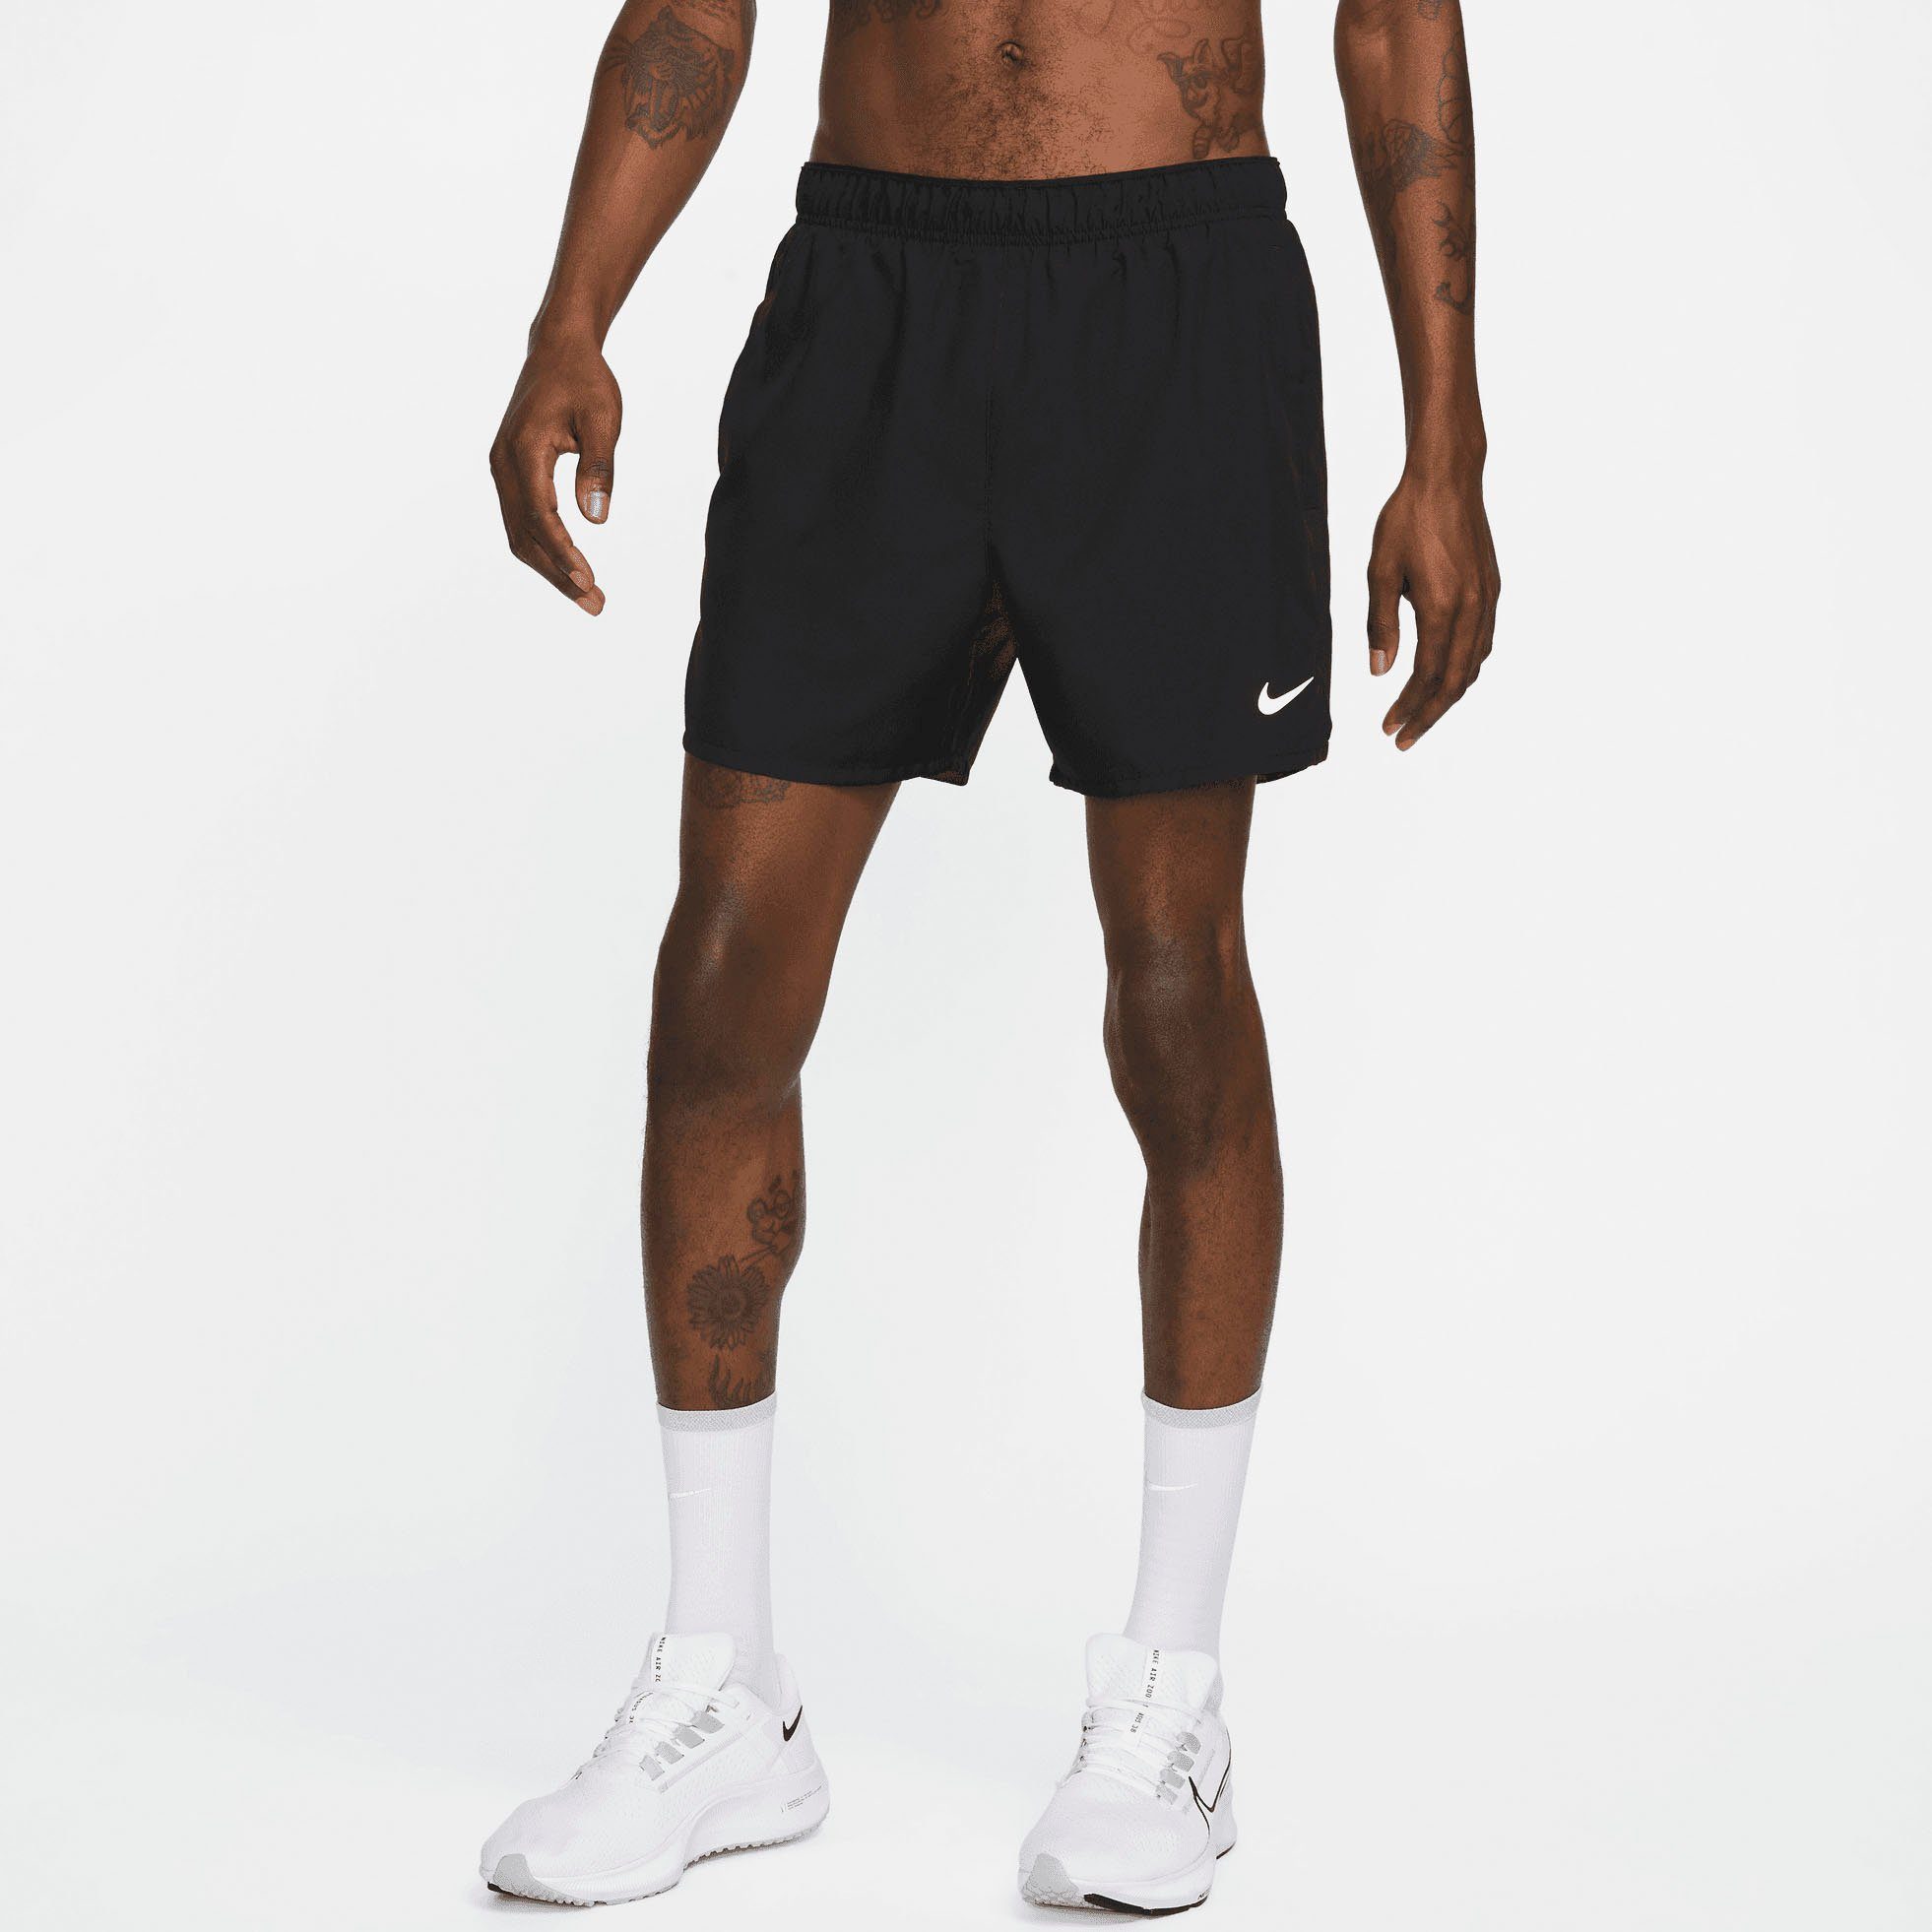 Brief-Lined Dri-FIT Challenger Laufshorts Running Men's " Nike Shorts